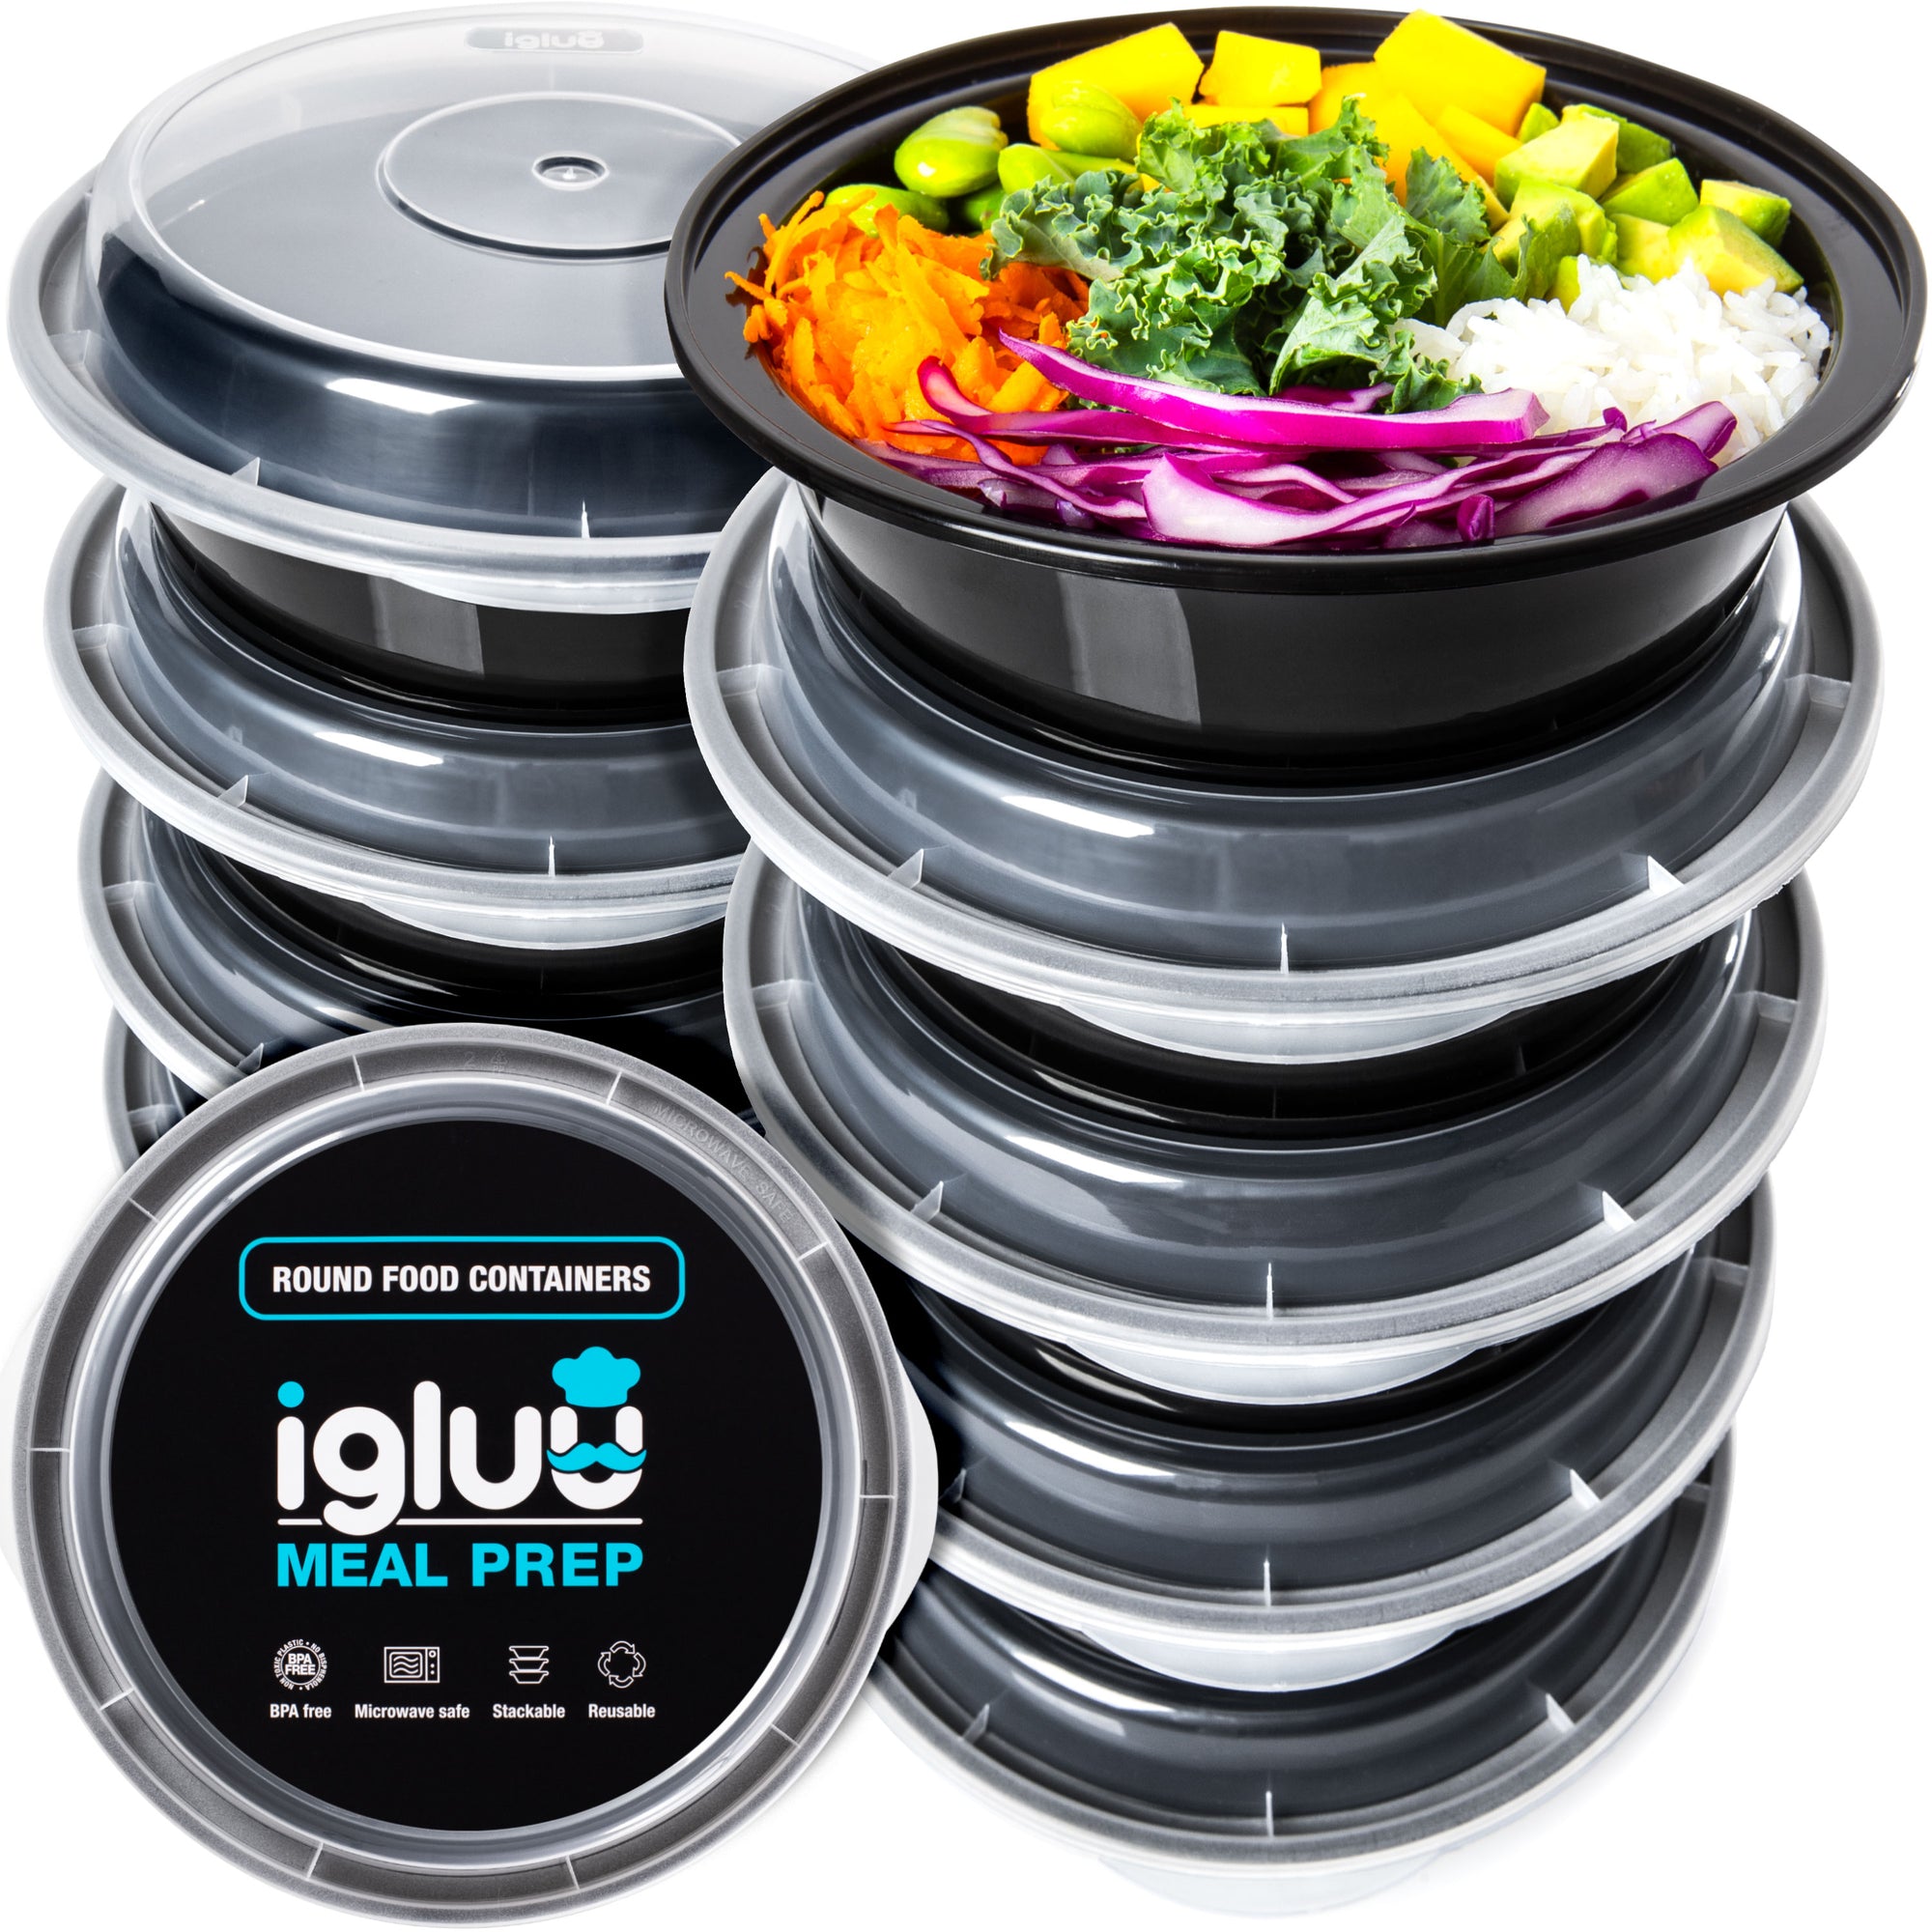 Round Meal Prep Food Containers (10 Pack)